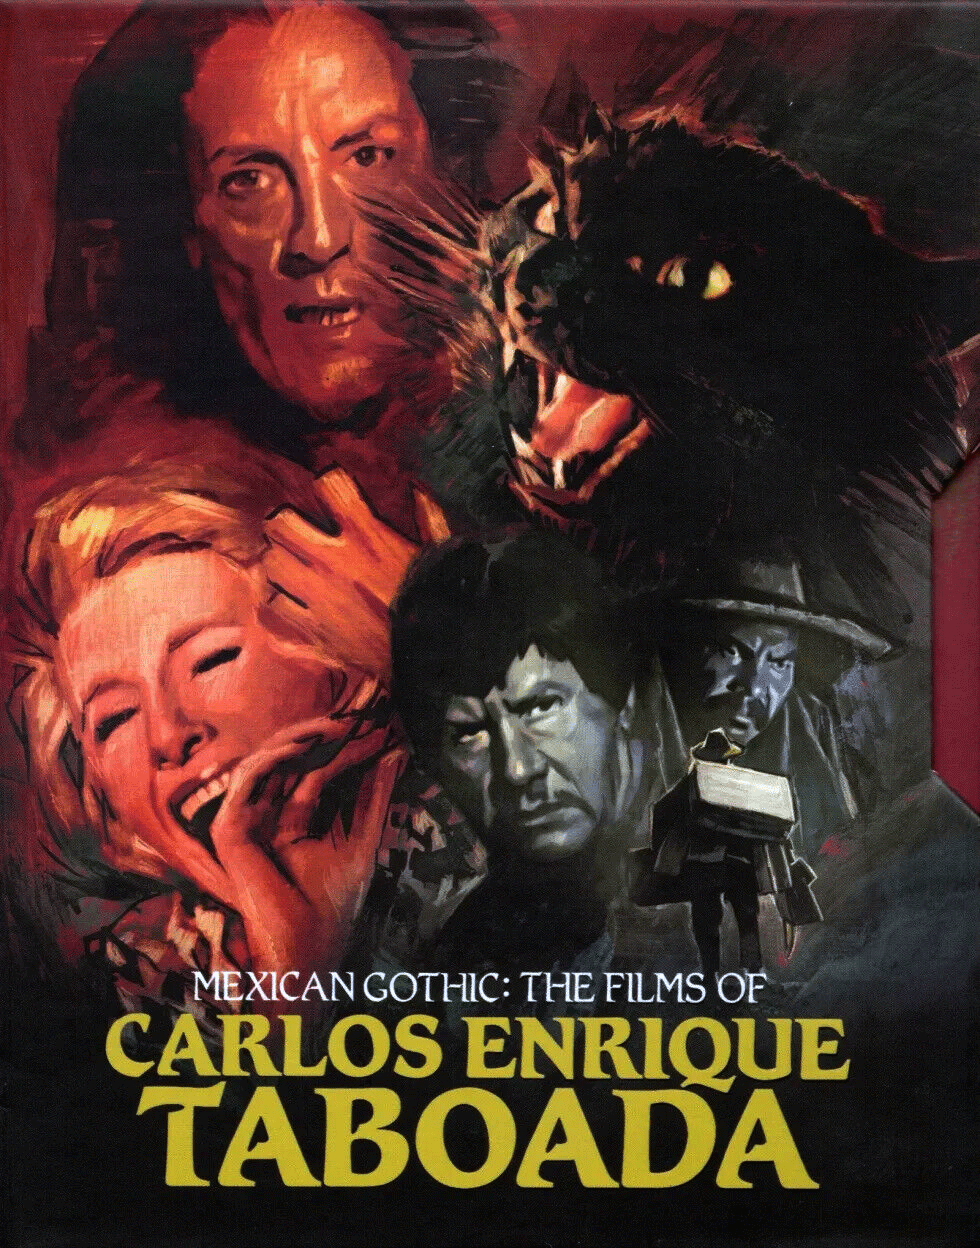 MEXICAN GOTHIC: THE FILMS OF CARLOS ENRIQUE TABOADA - BLU-RAY BOX SET (LIMITED EDITION)